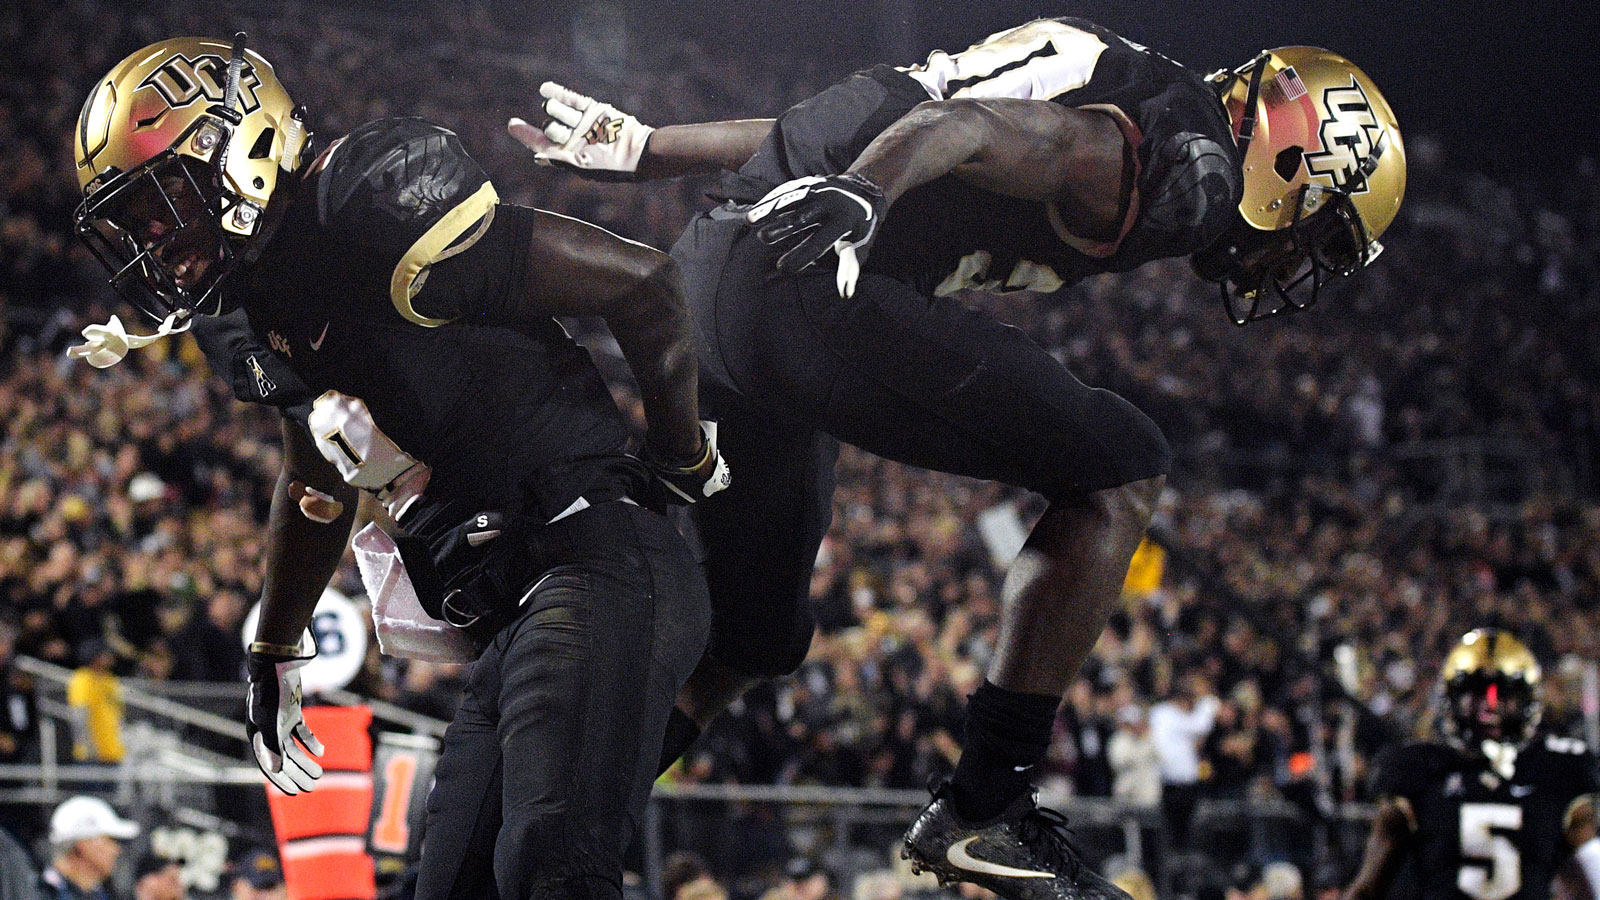 UCF jumps three spots to No. 8, Gators move up to No. 13 in latest Top 25 AP Poll